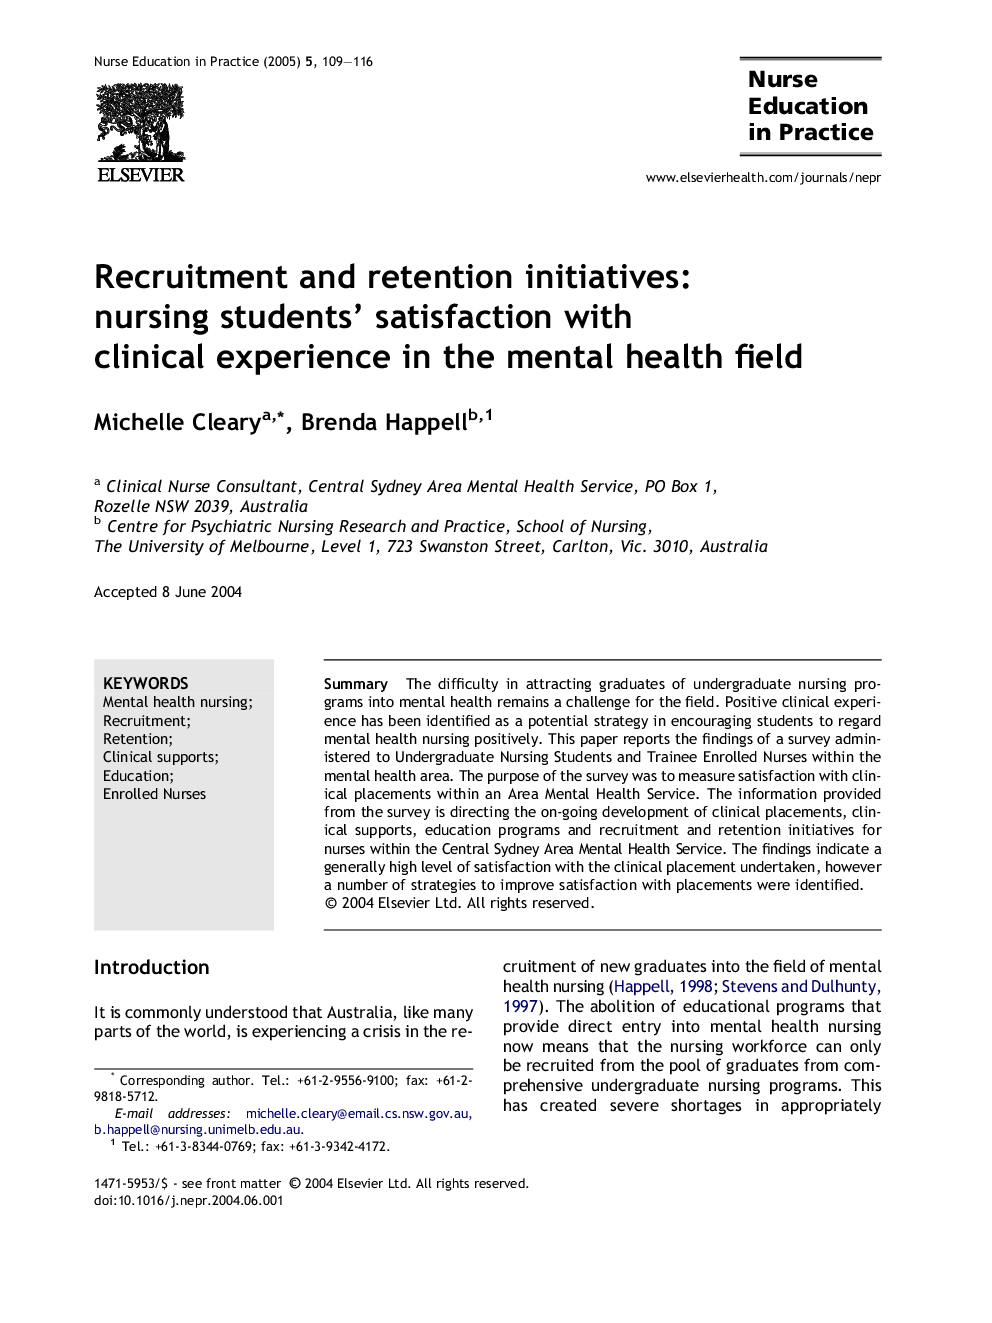 Recruitment and retention initiatives: nursing students' satisfaction with clinical experience in the mental health field